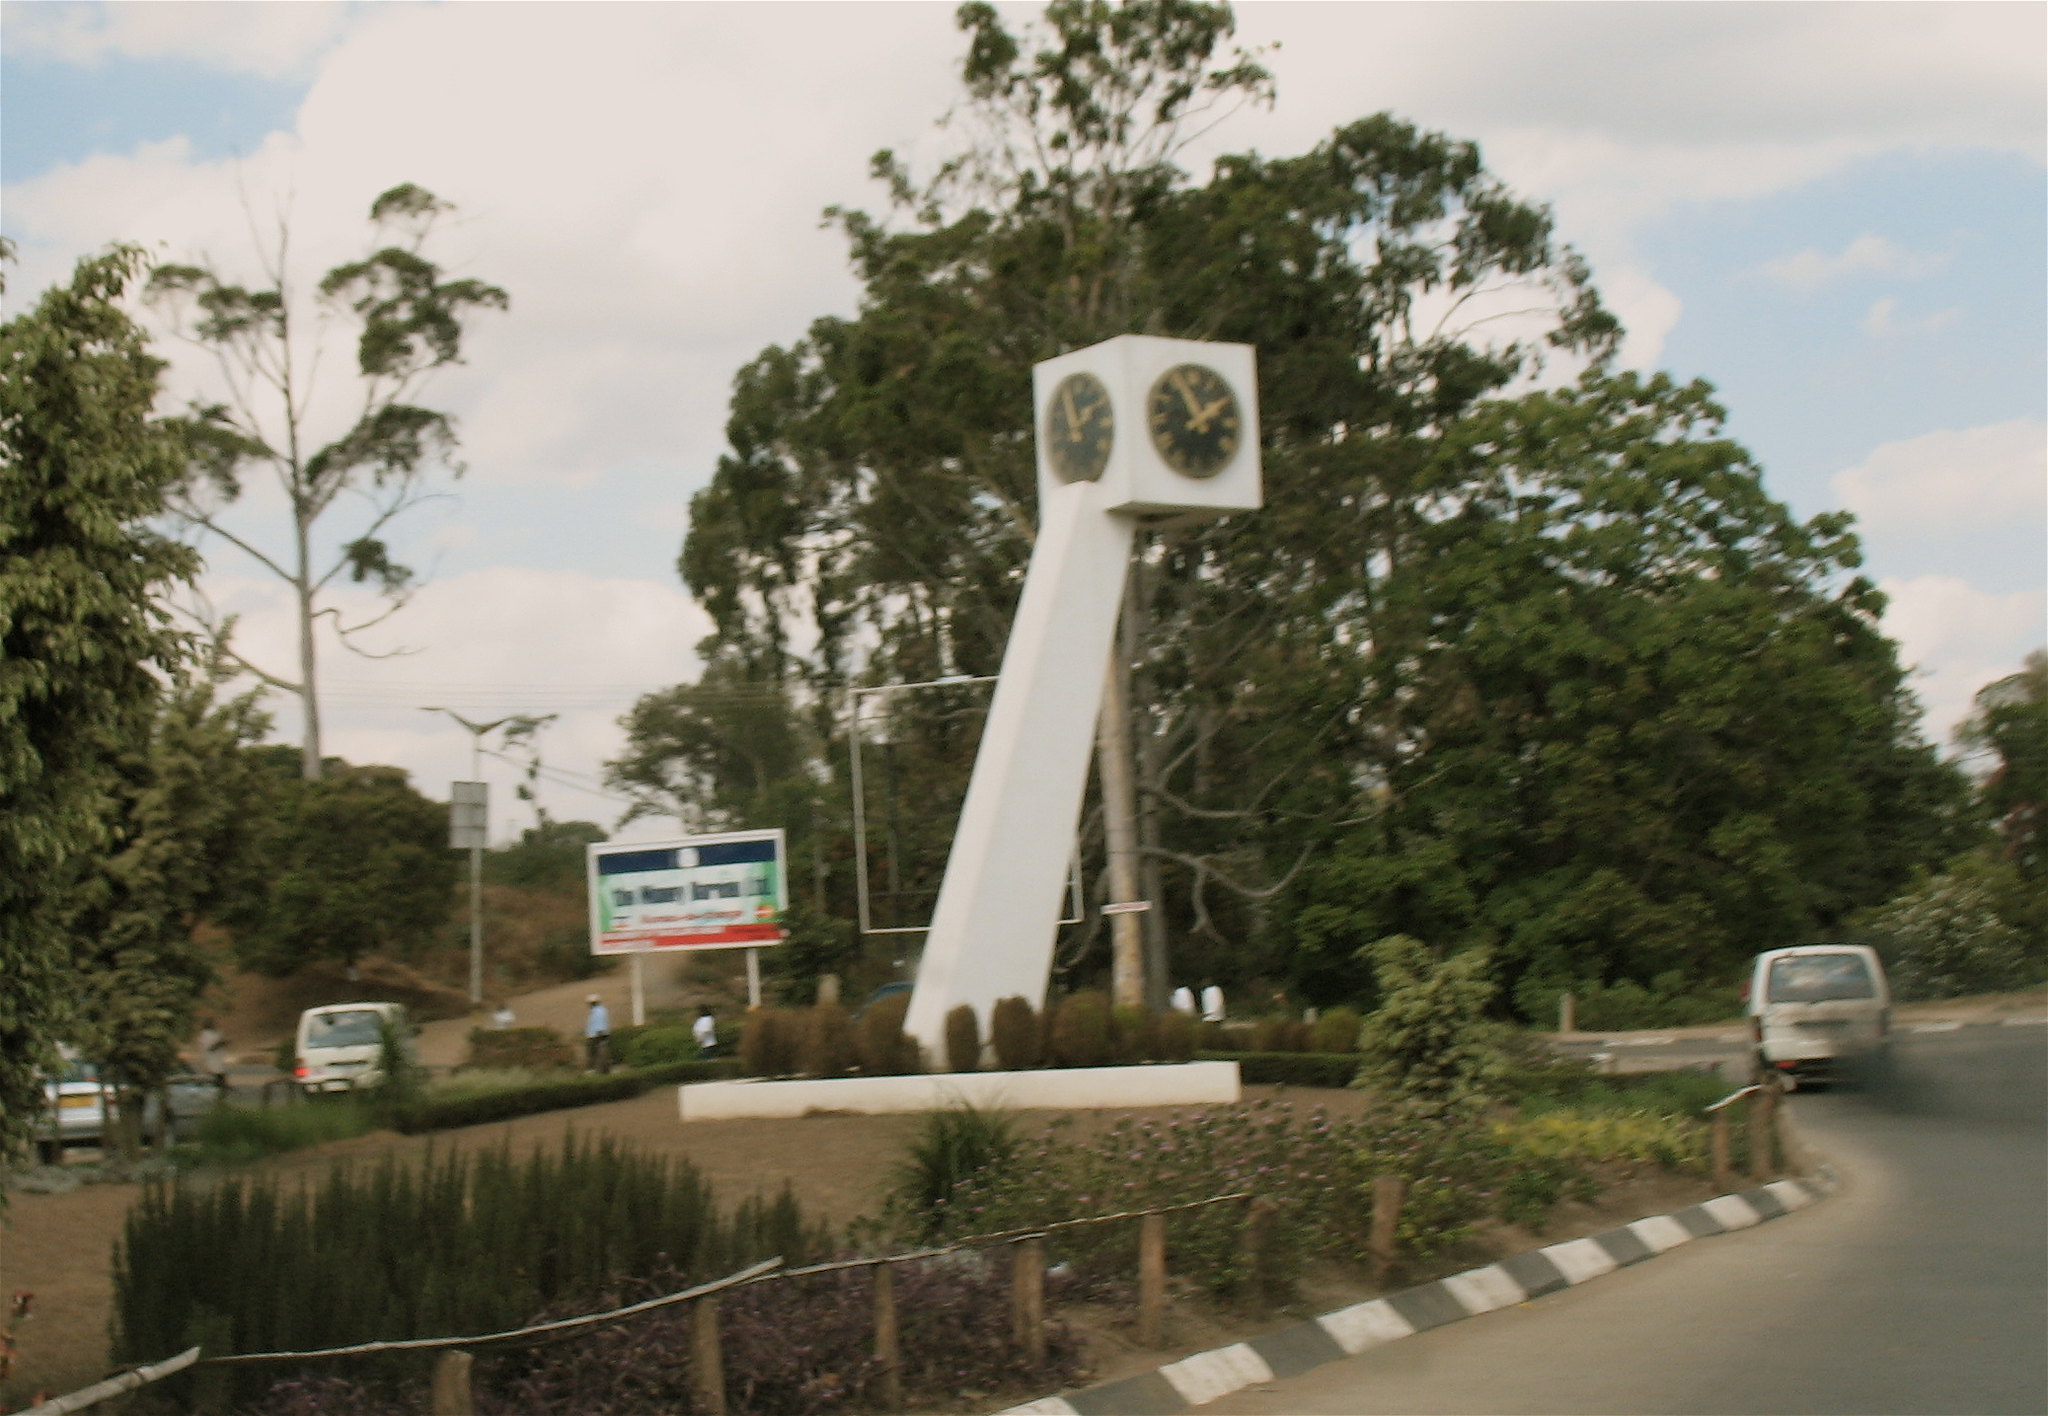 BLANTYRE, MALAWI’S COMMERCIAL CENTER